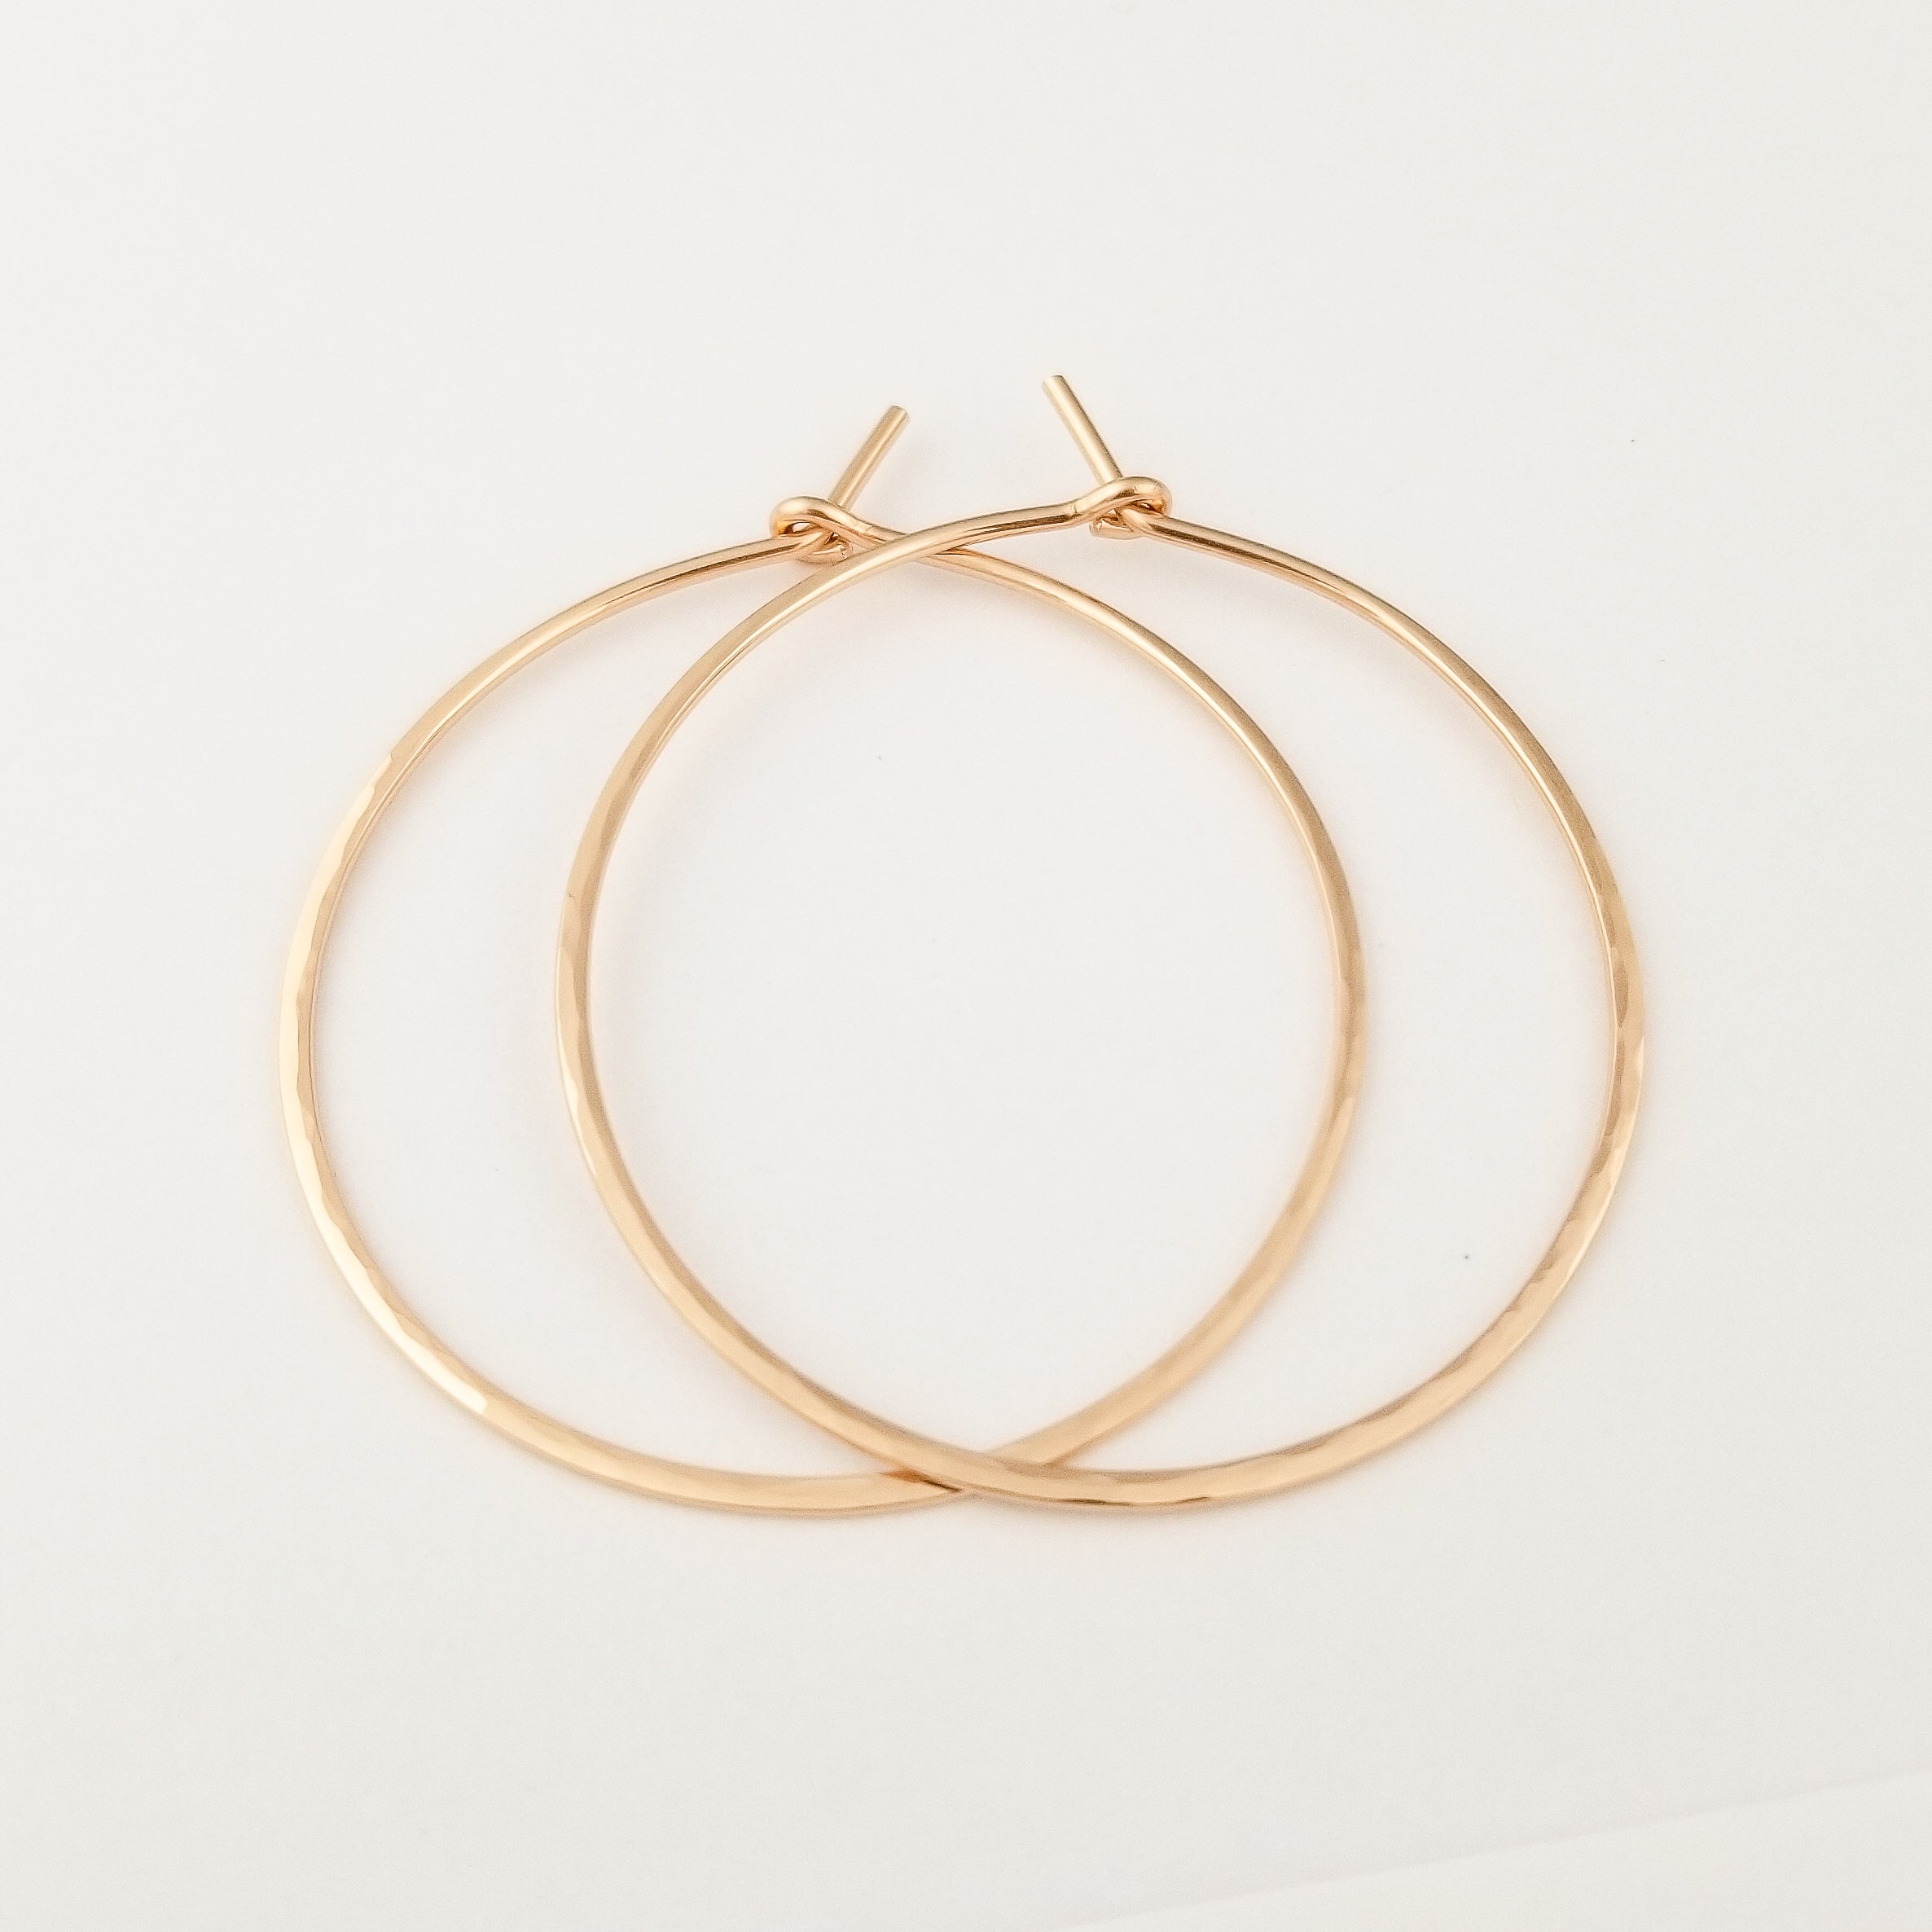 Thick Hammered Solid Gold Hoop Earrings - Aris Designs